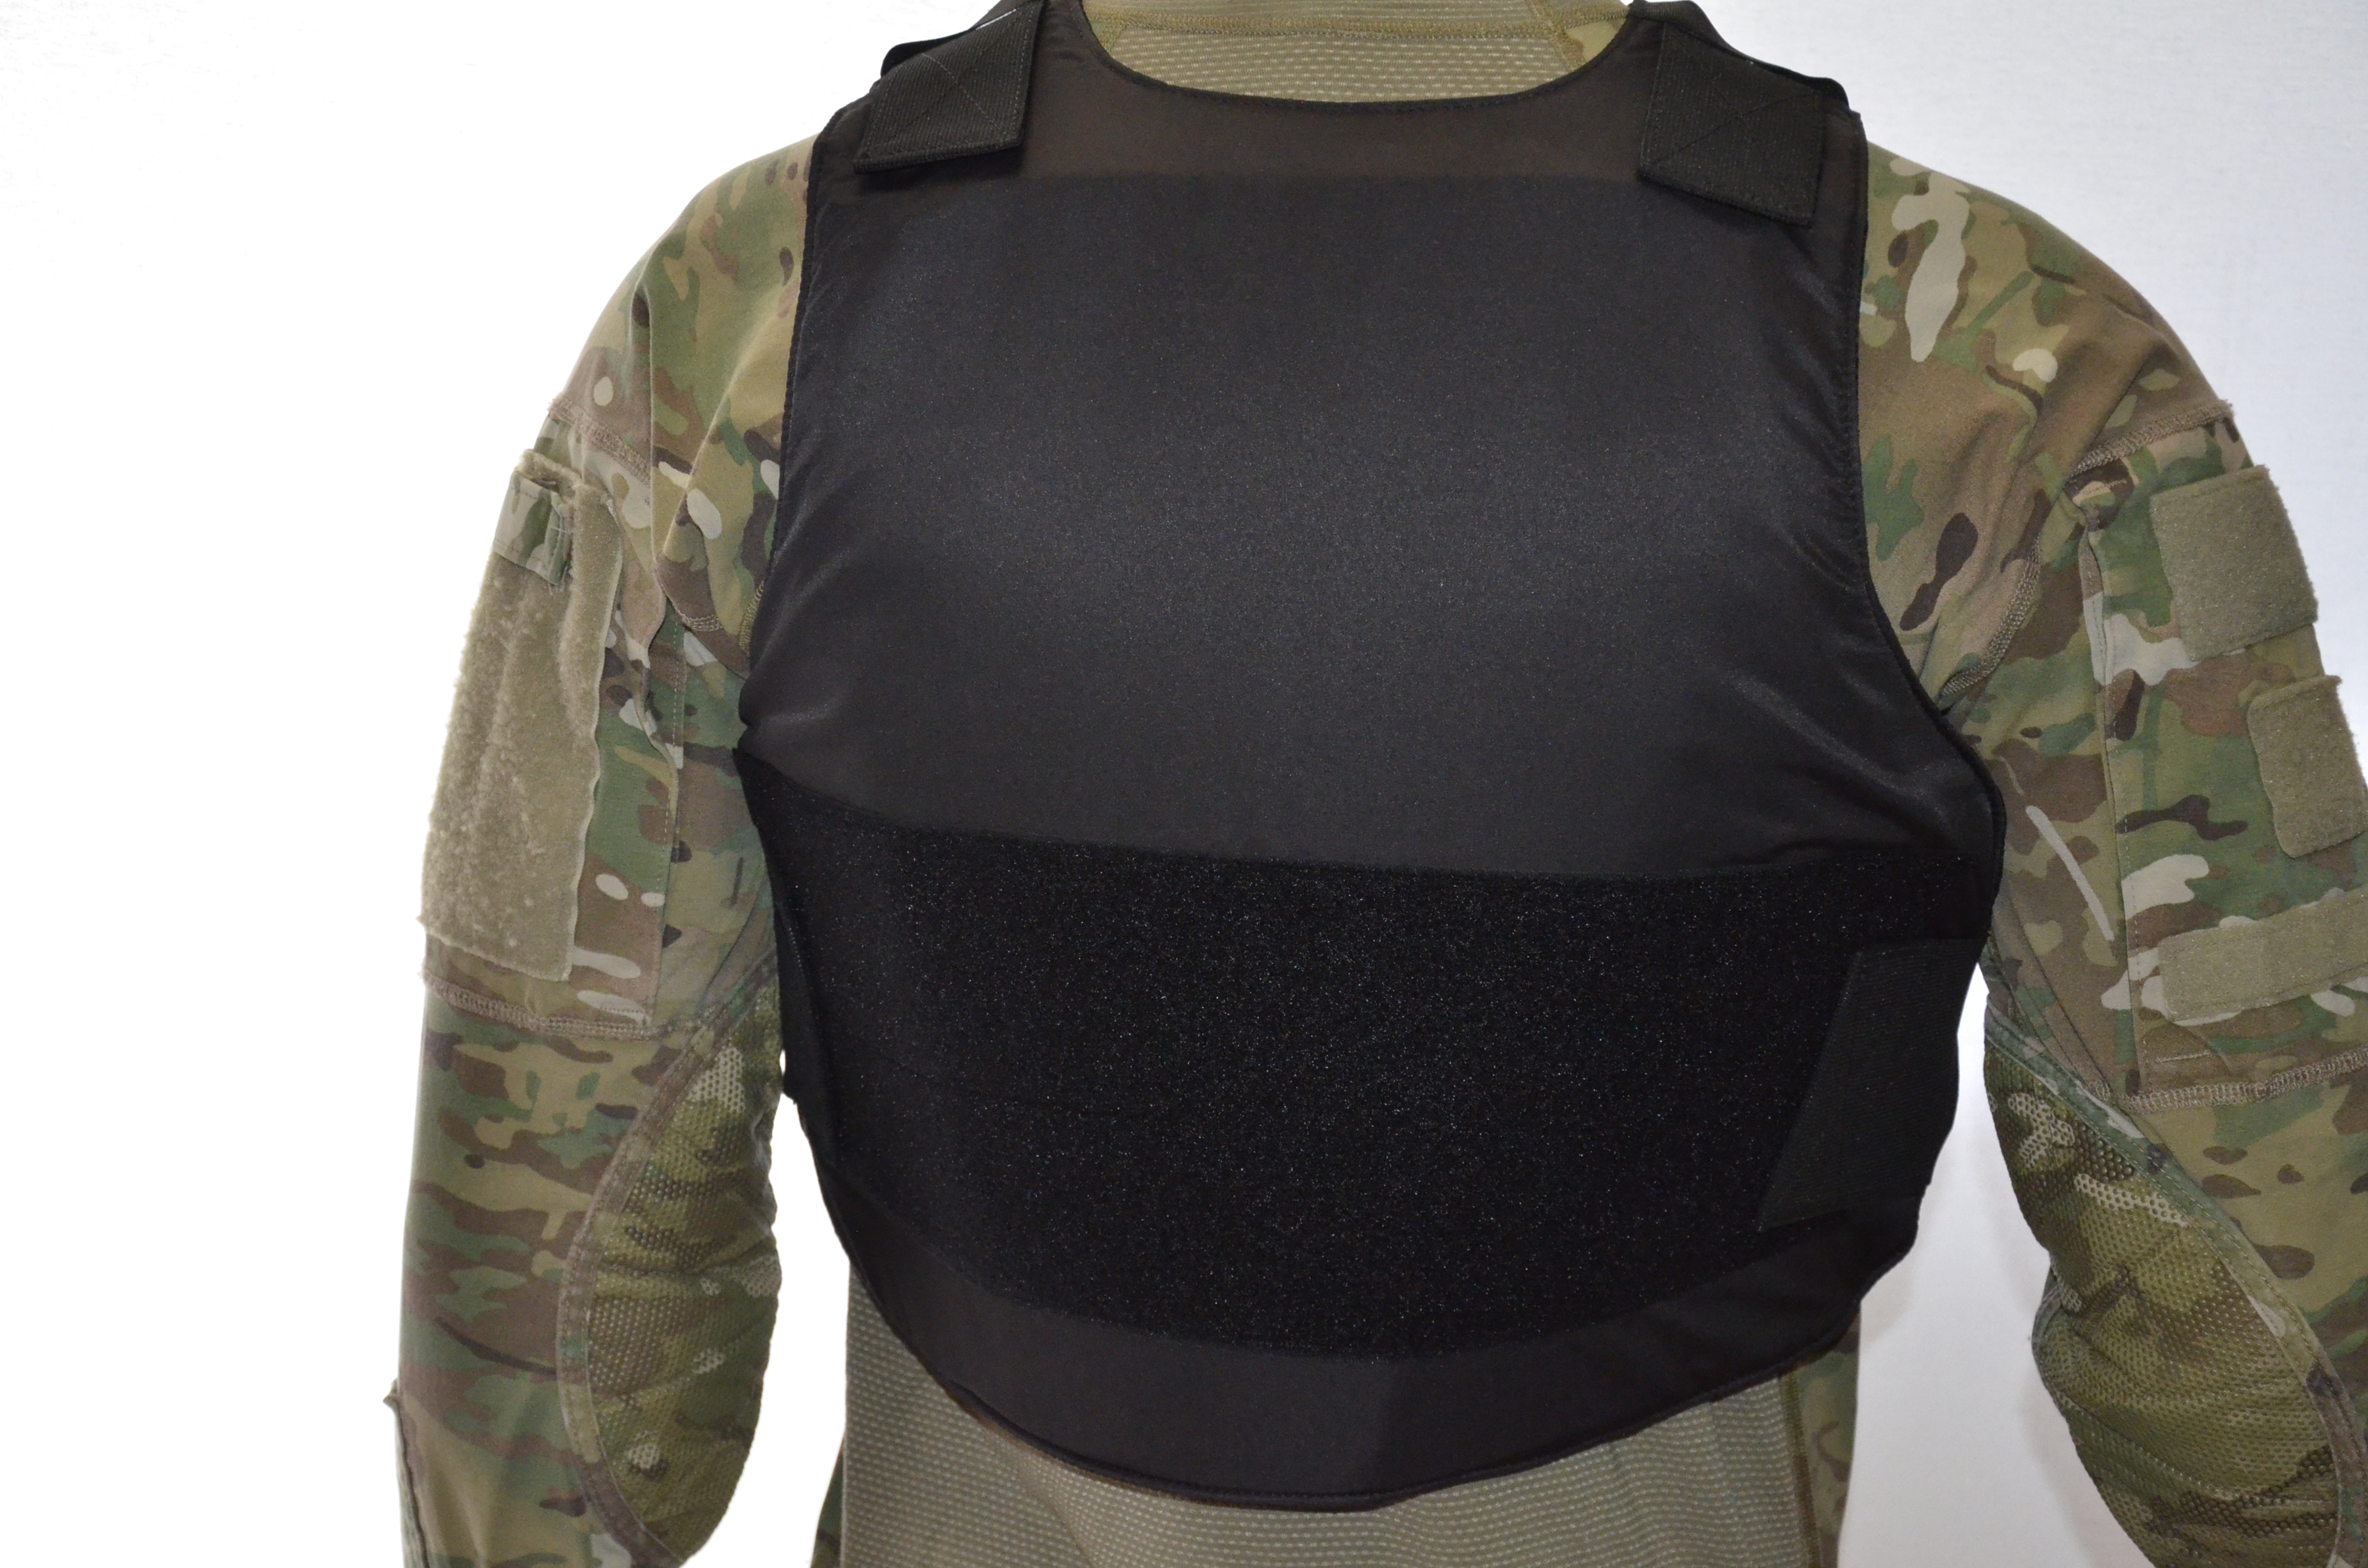 Level 3 Body Armor - Adaptable and Modular - The Storm™ Foundation